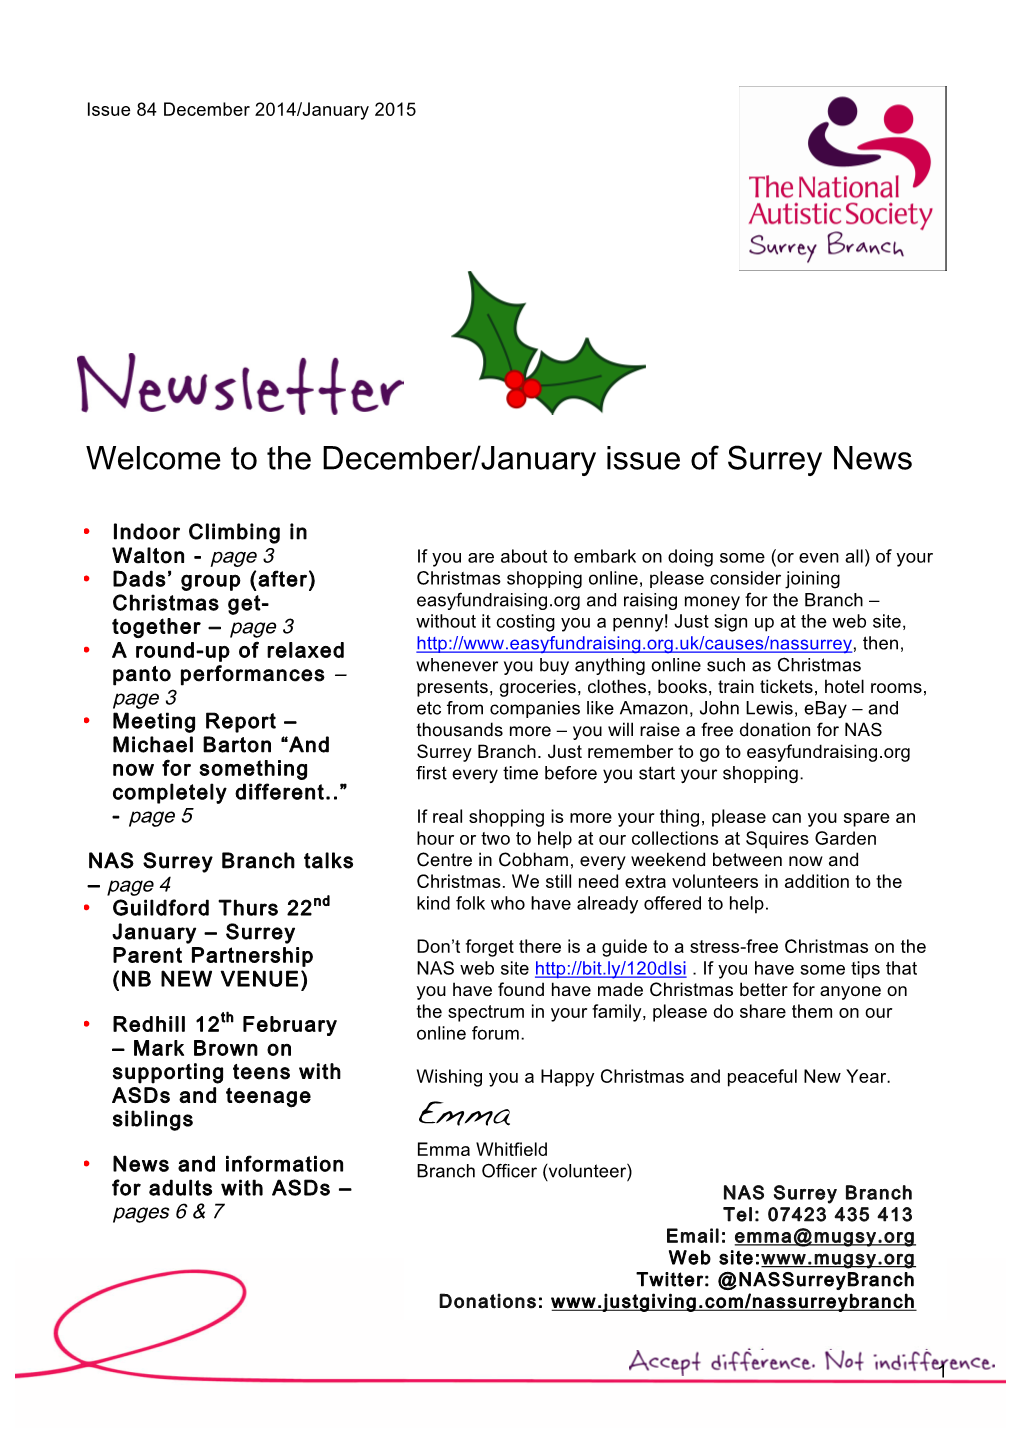 The December/January Issue of Surrey News